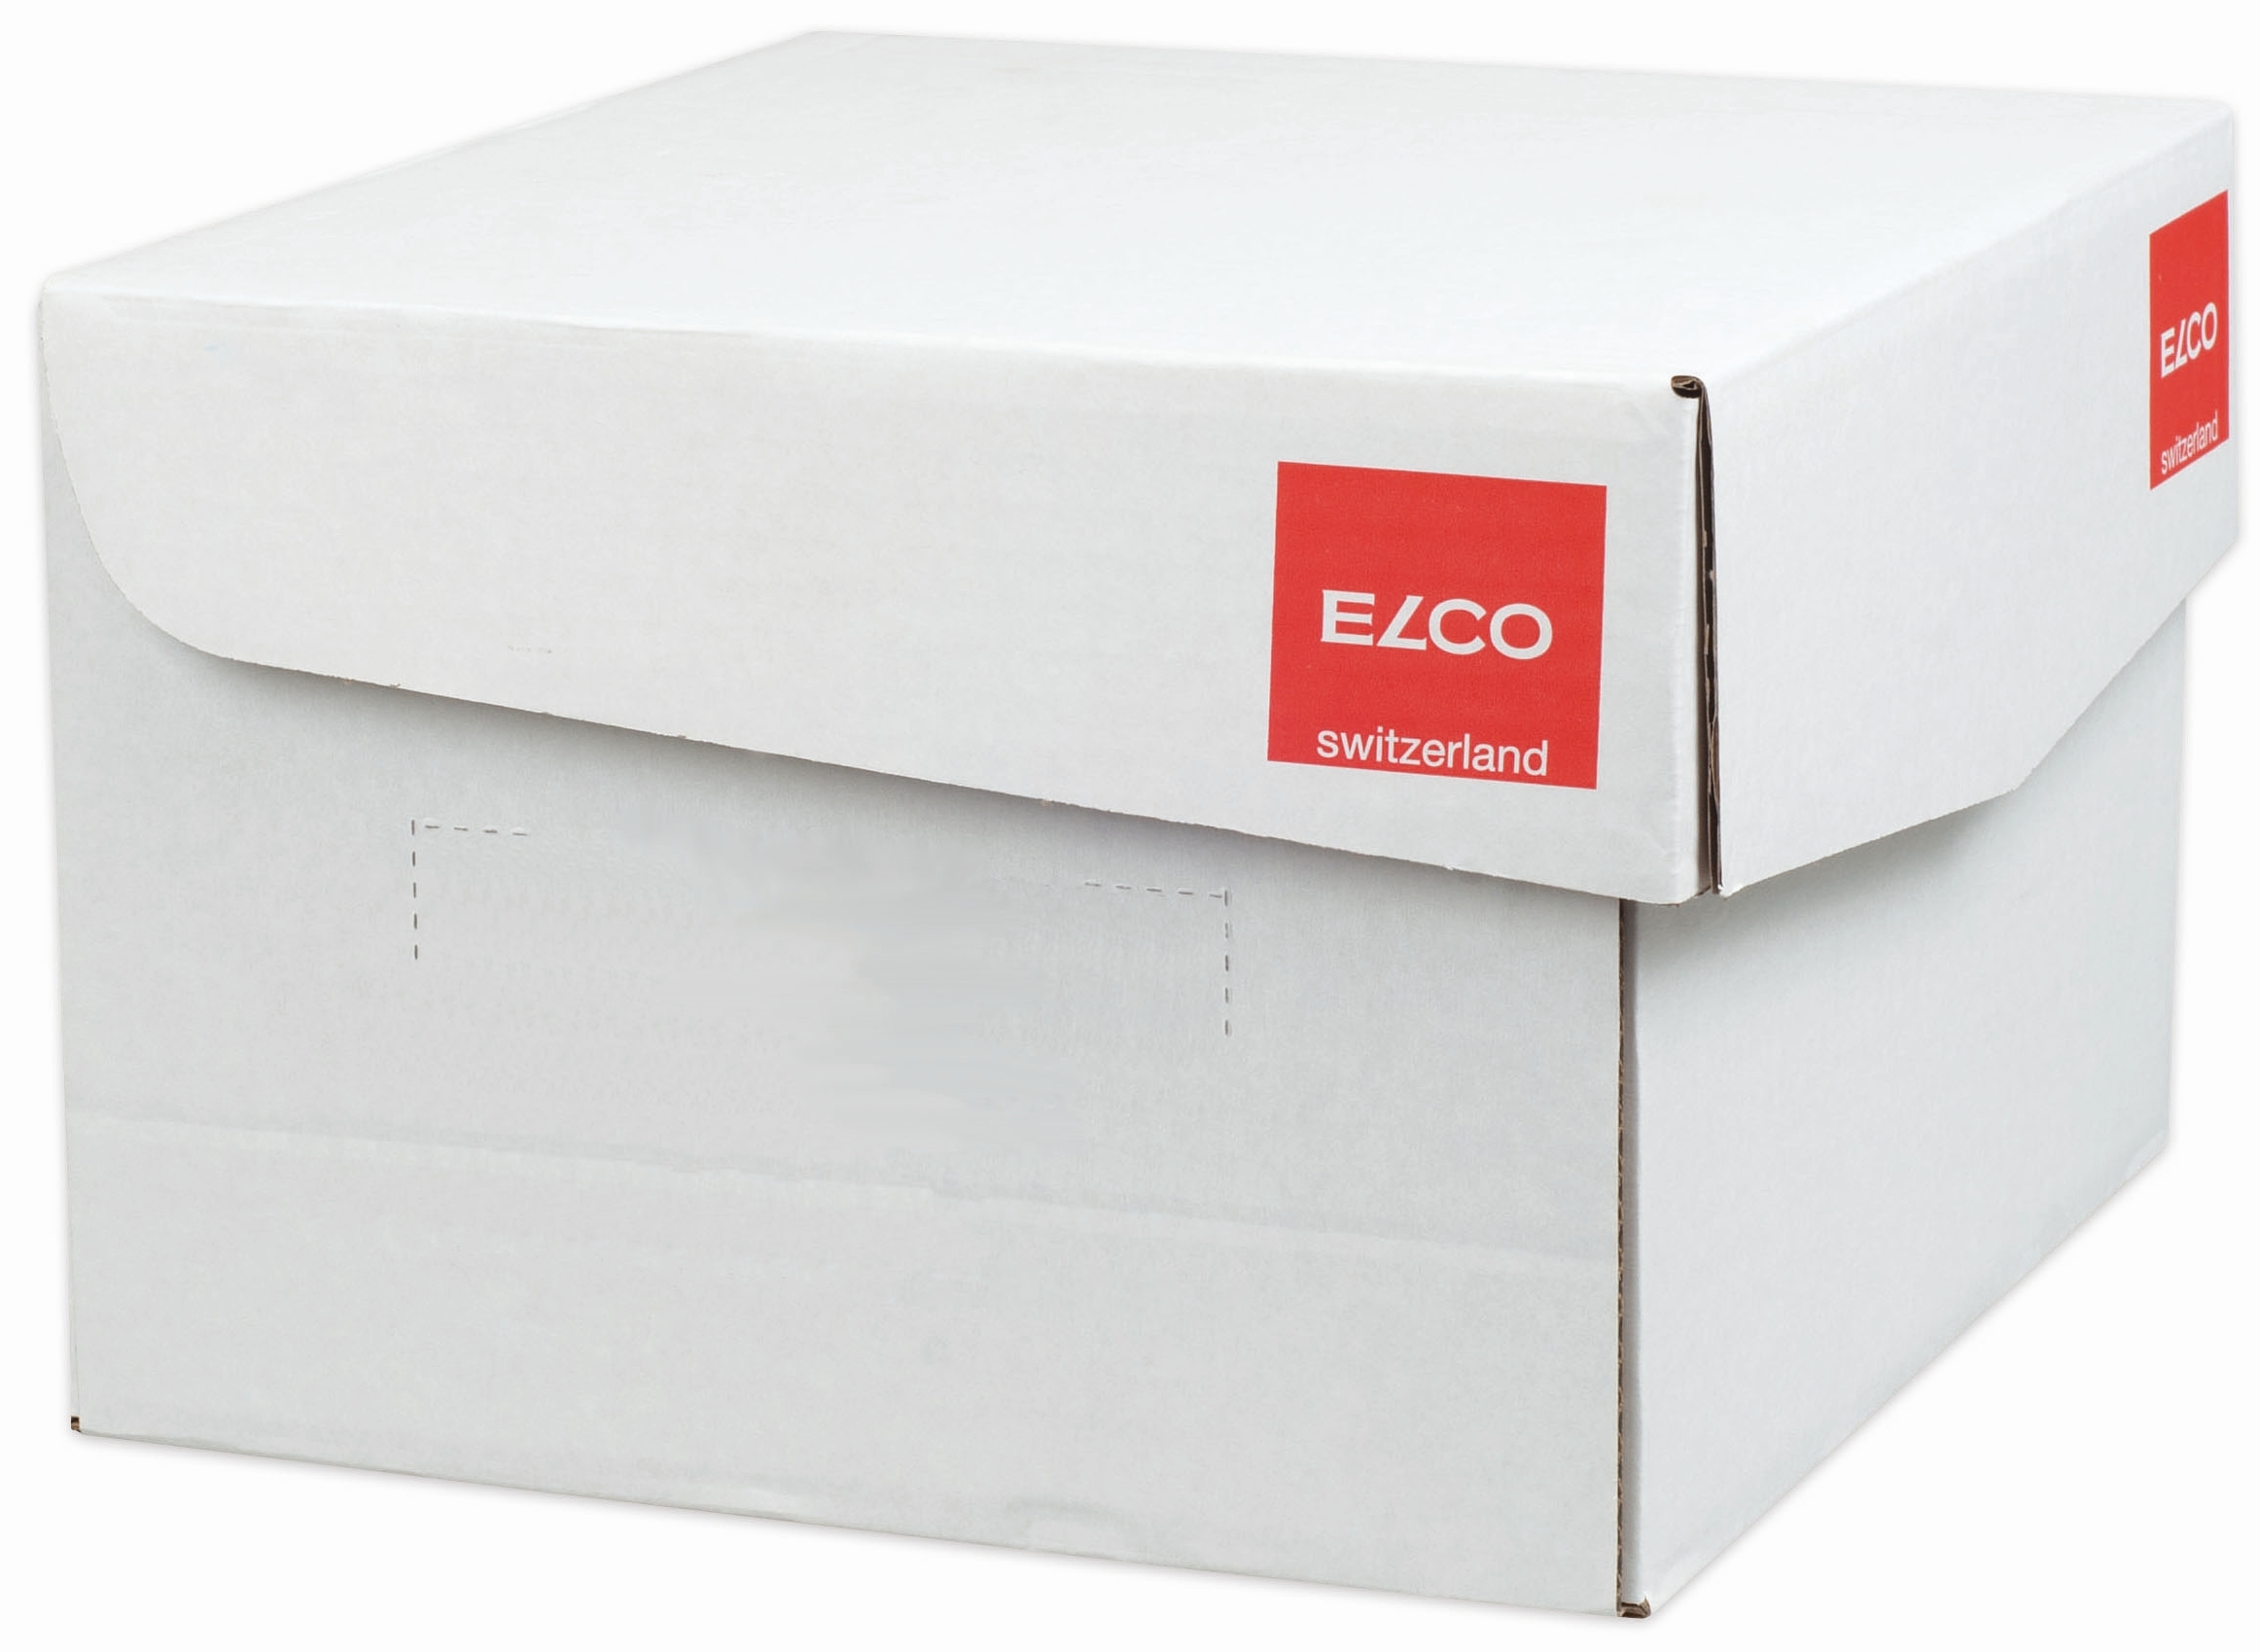 ELCO Couvert Security C5 33886 opaque 100g 500 Stk.